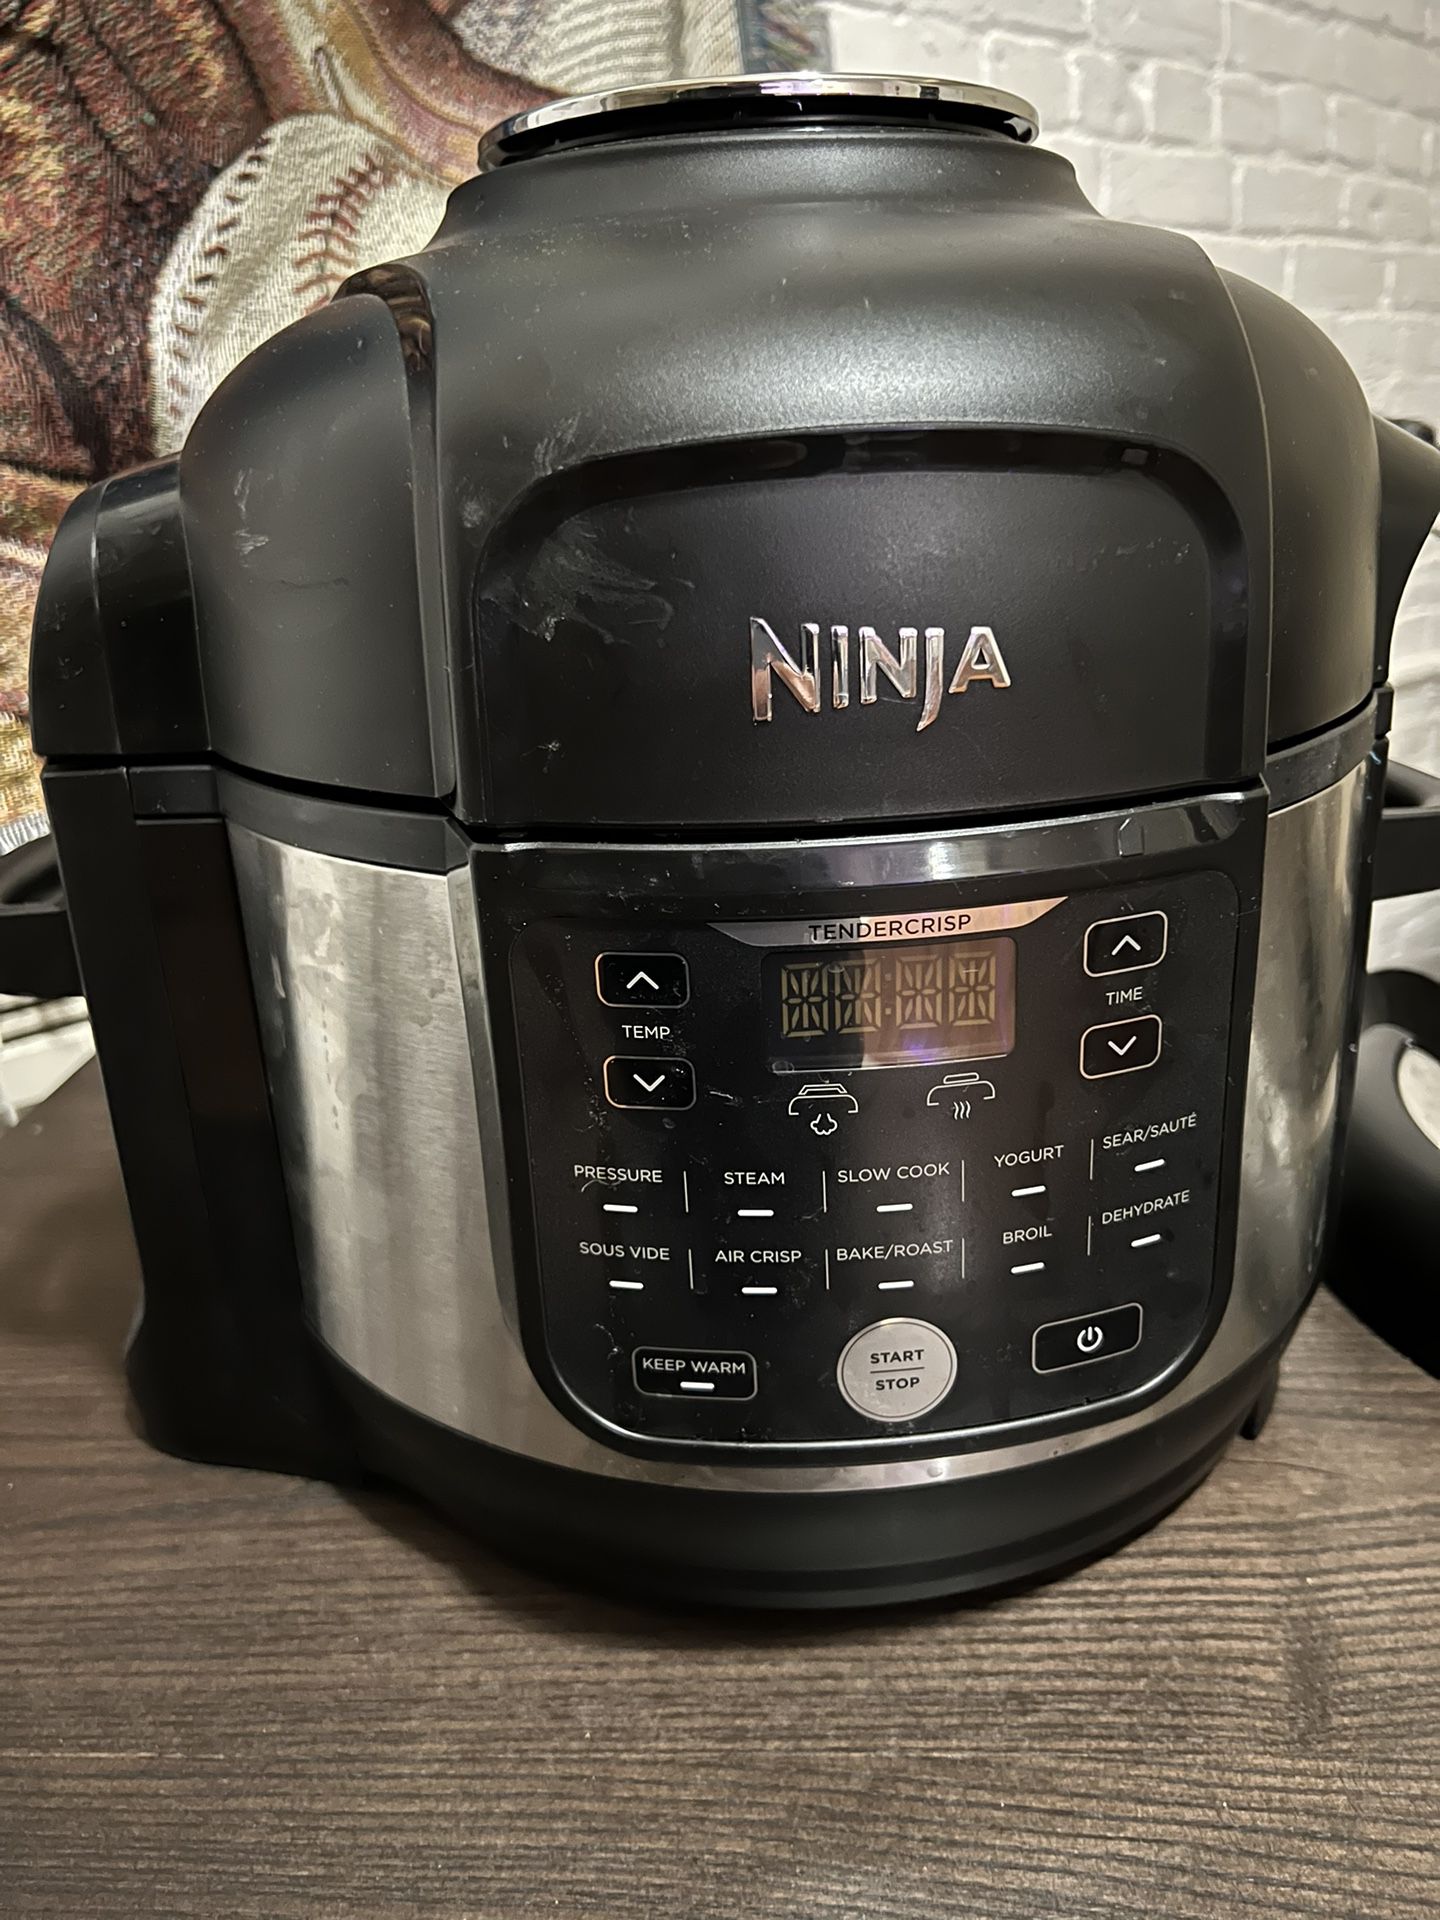 Ninja Foodi 11-in-1 6.5-qt Pro Pressure Cooker + Air Fryer with Stainless finish, FD302 - Stainless Steel